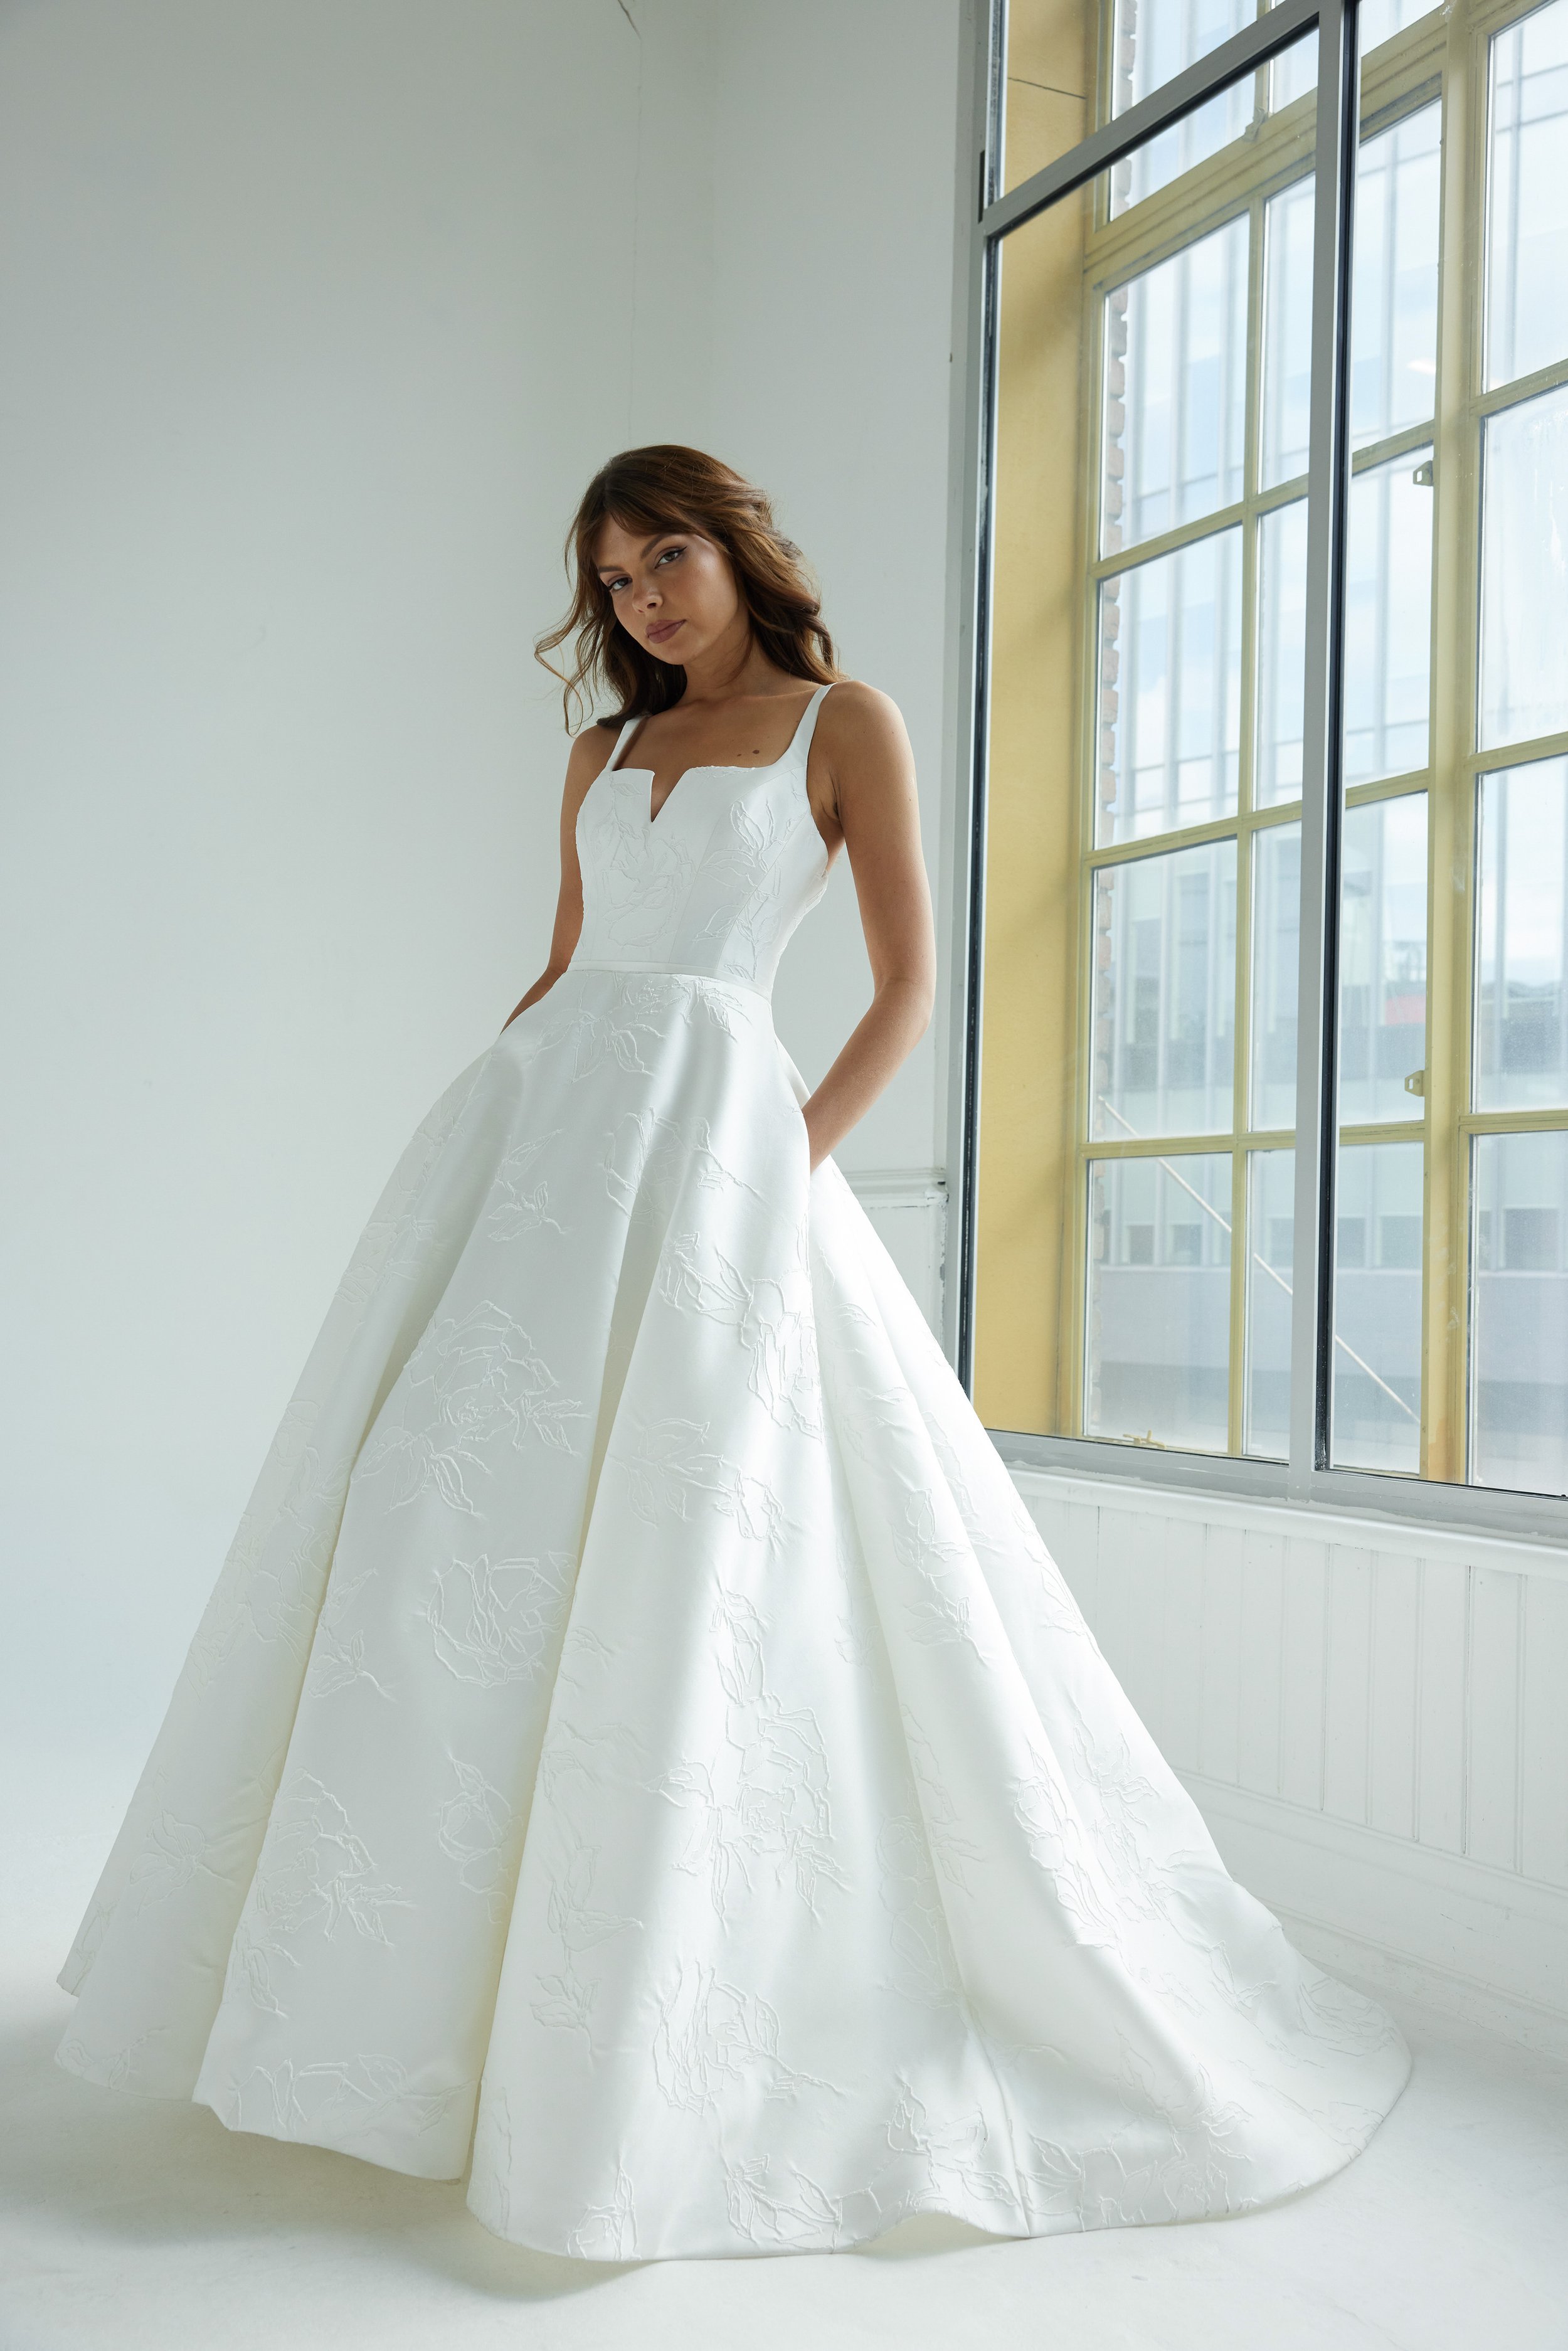 Bloomsbury by Suzanne Neville at Frances Day Bridal 